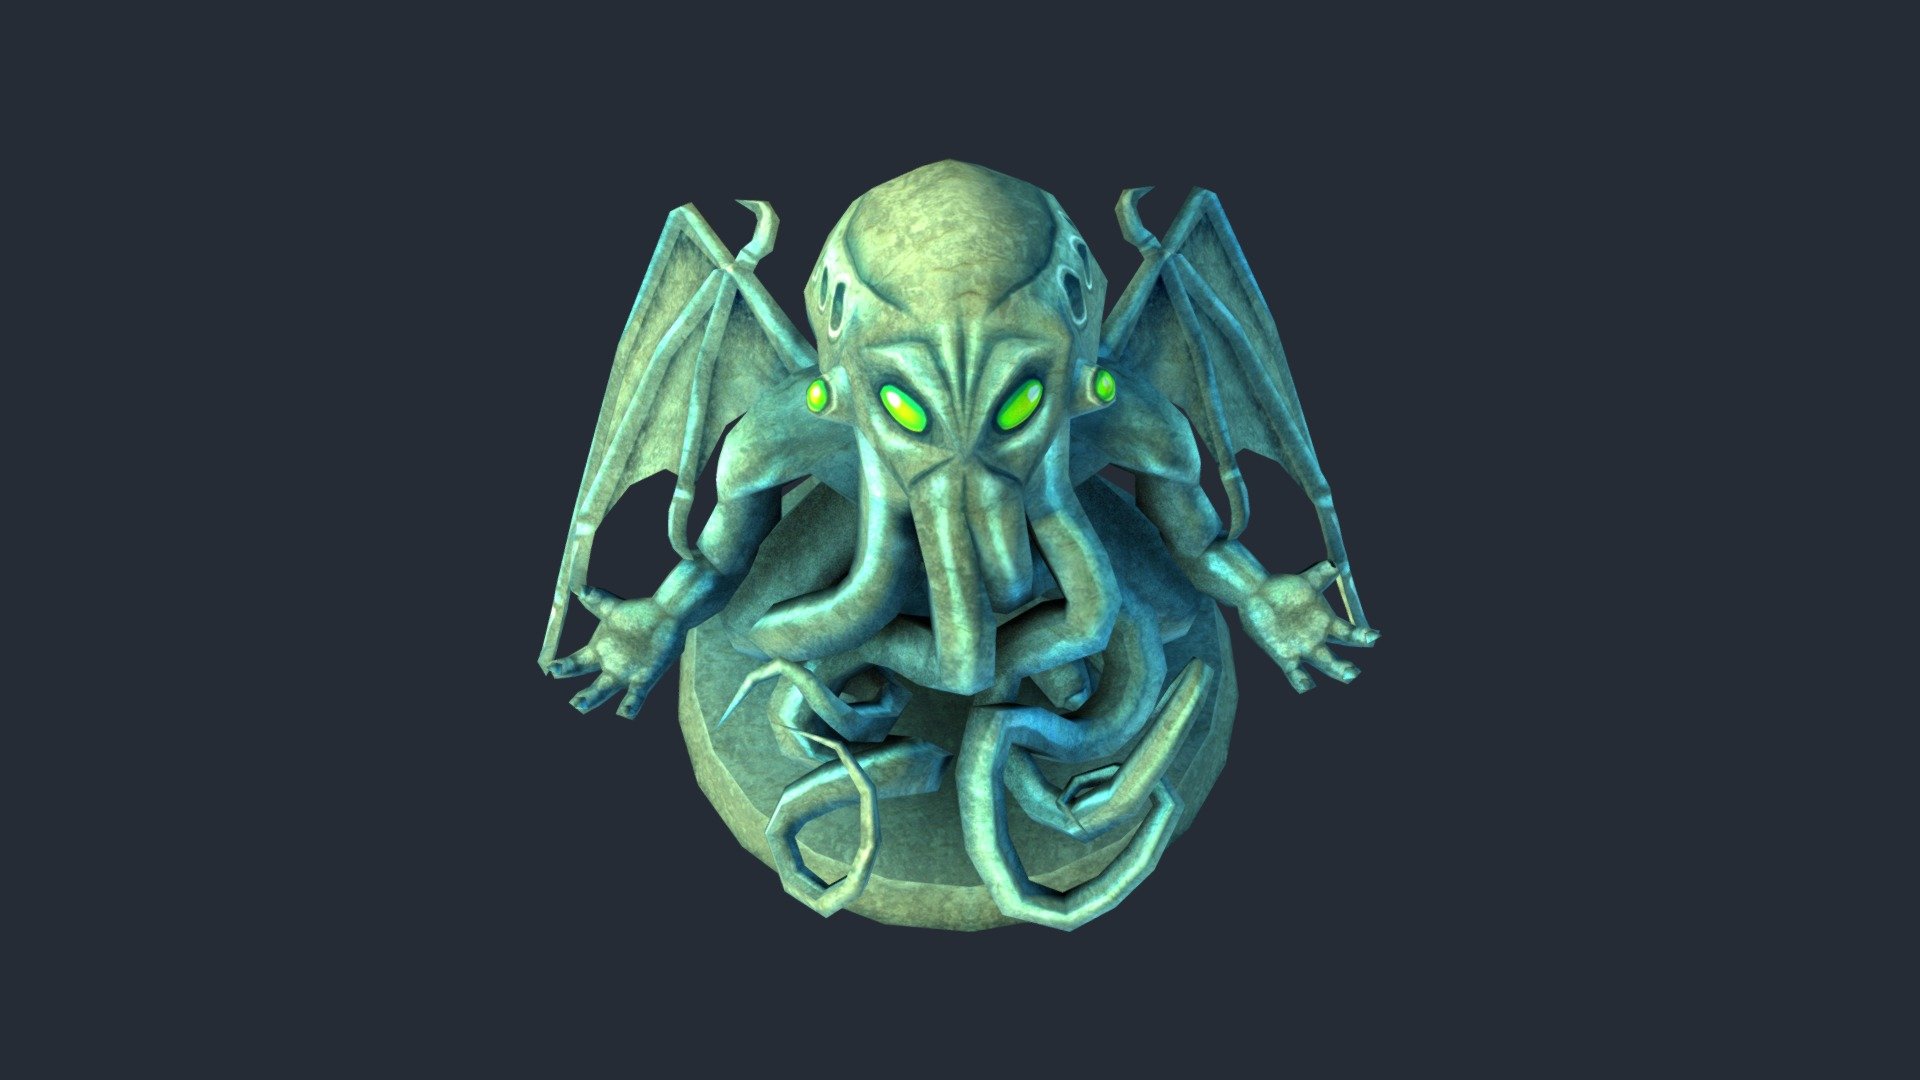 This is from our game Tesla vs Lovecraft. A top-down shooter where you fight against lovecraftian horrors as Mr. Tesla - the inventor extraordinaire.

http://teslavslovecraft.com - Tesla vs Lovecraft - Cthulhu Statue - 3D model by 10tons 3d model